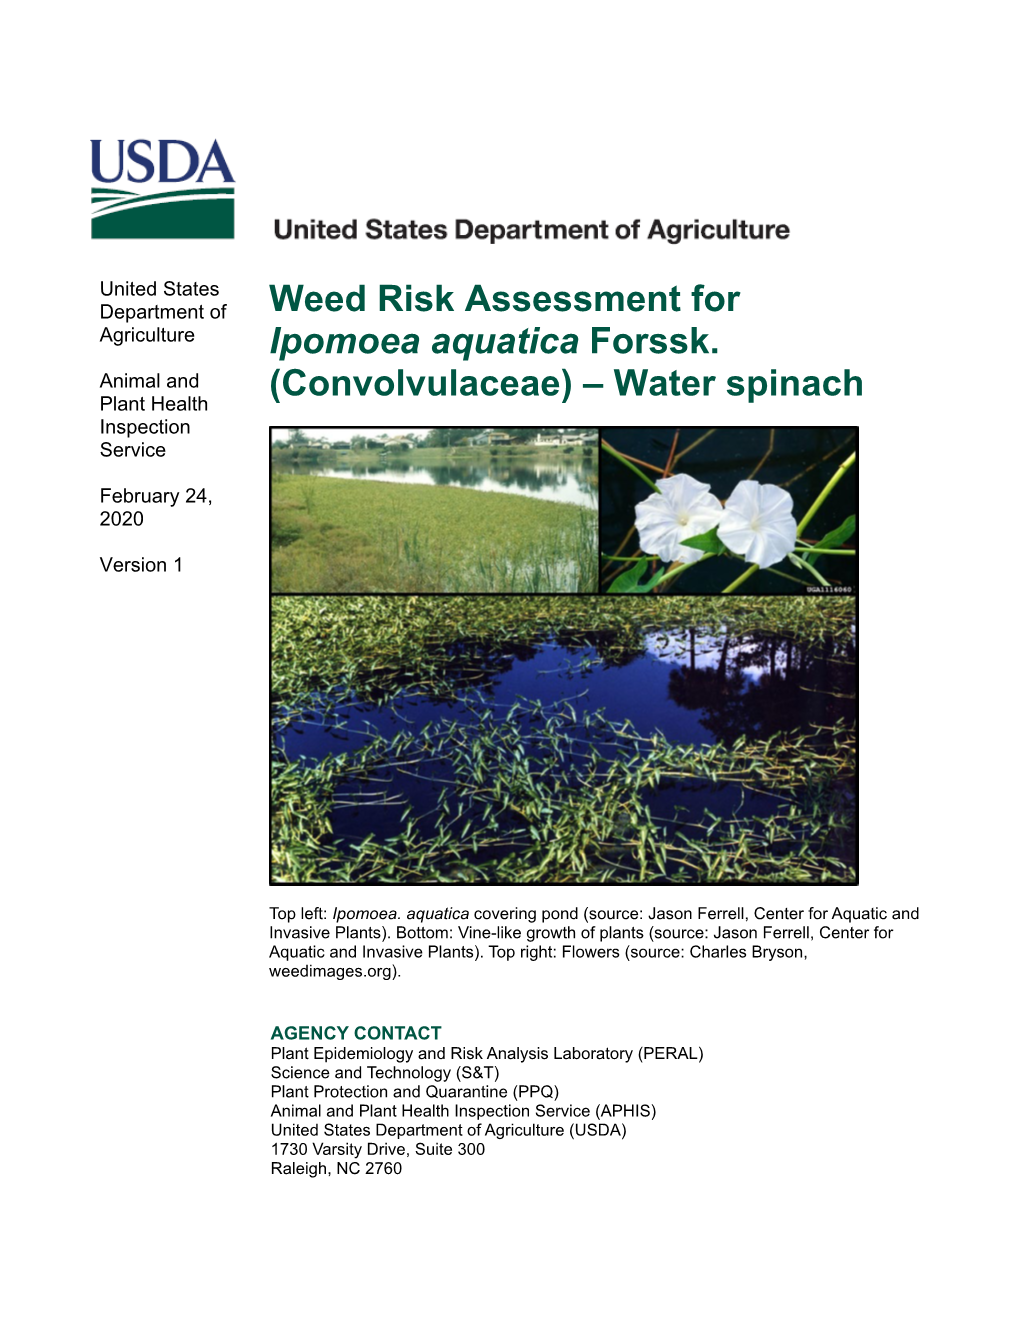 Weed Risk Assessment for Ipomoea Aquatica Forssk. (Convolvulaceae) – Water Spinach